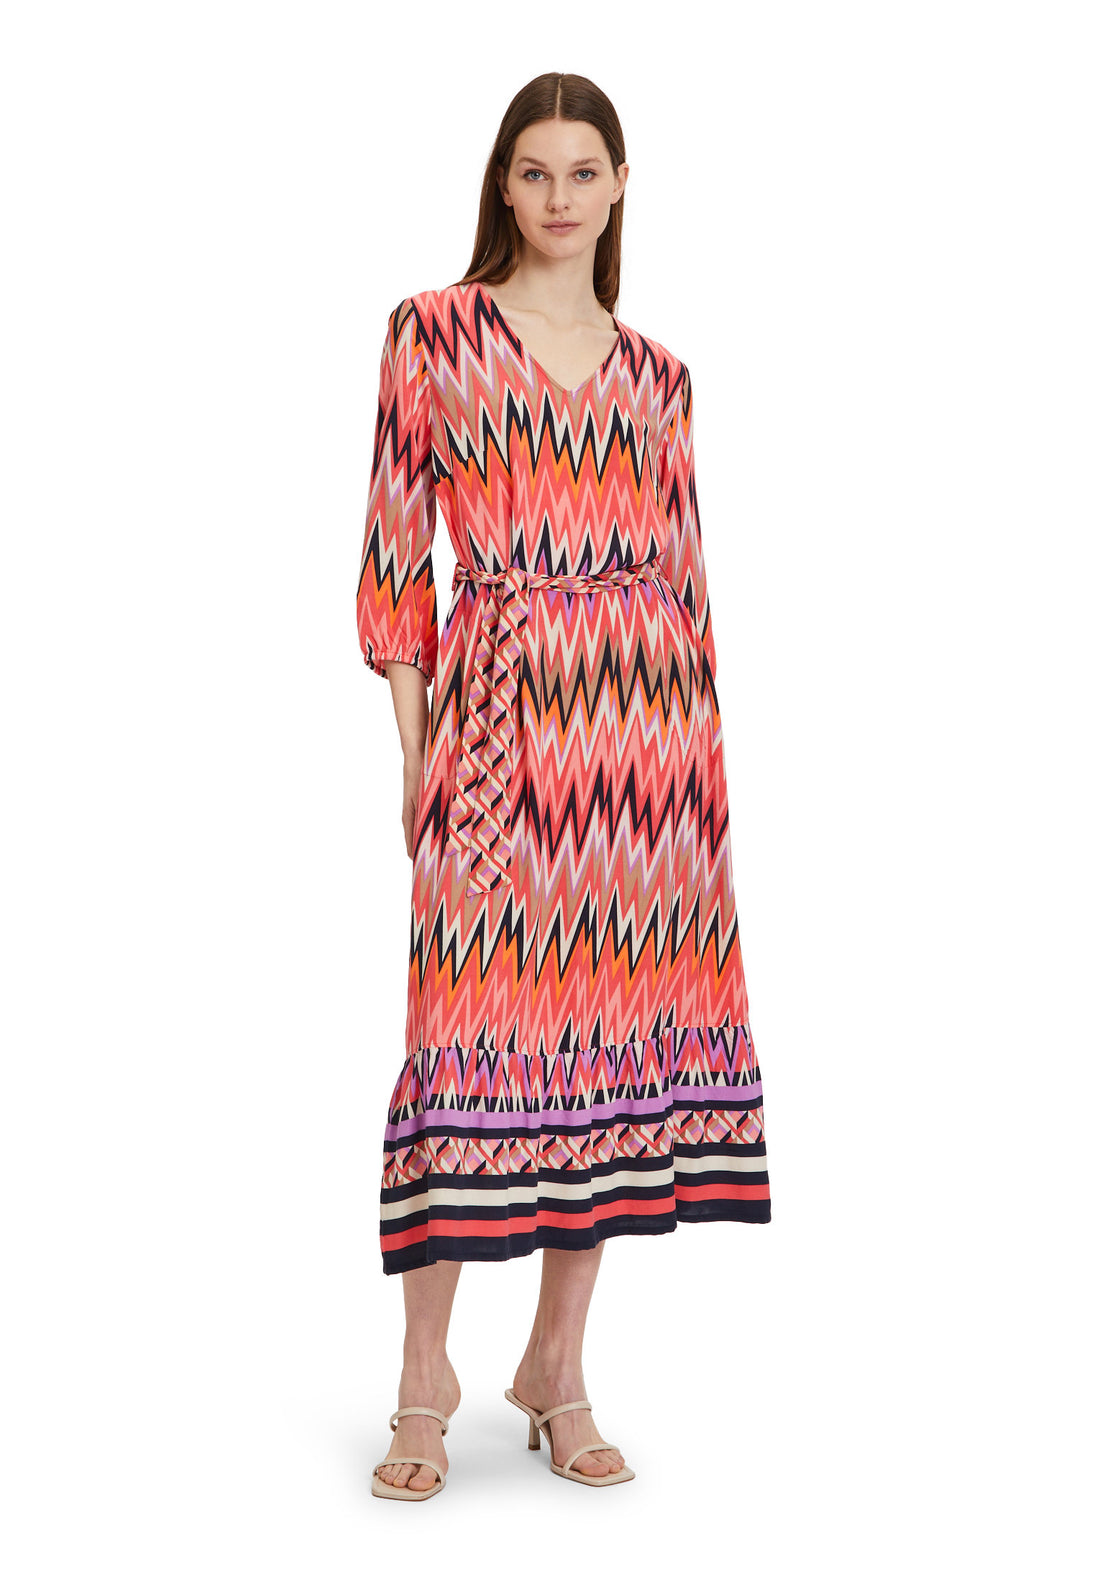 Printed Casual Midi Dress With 3/4 Sleeves_1532 2515_4868_03